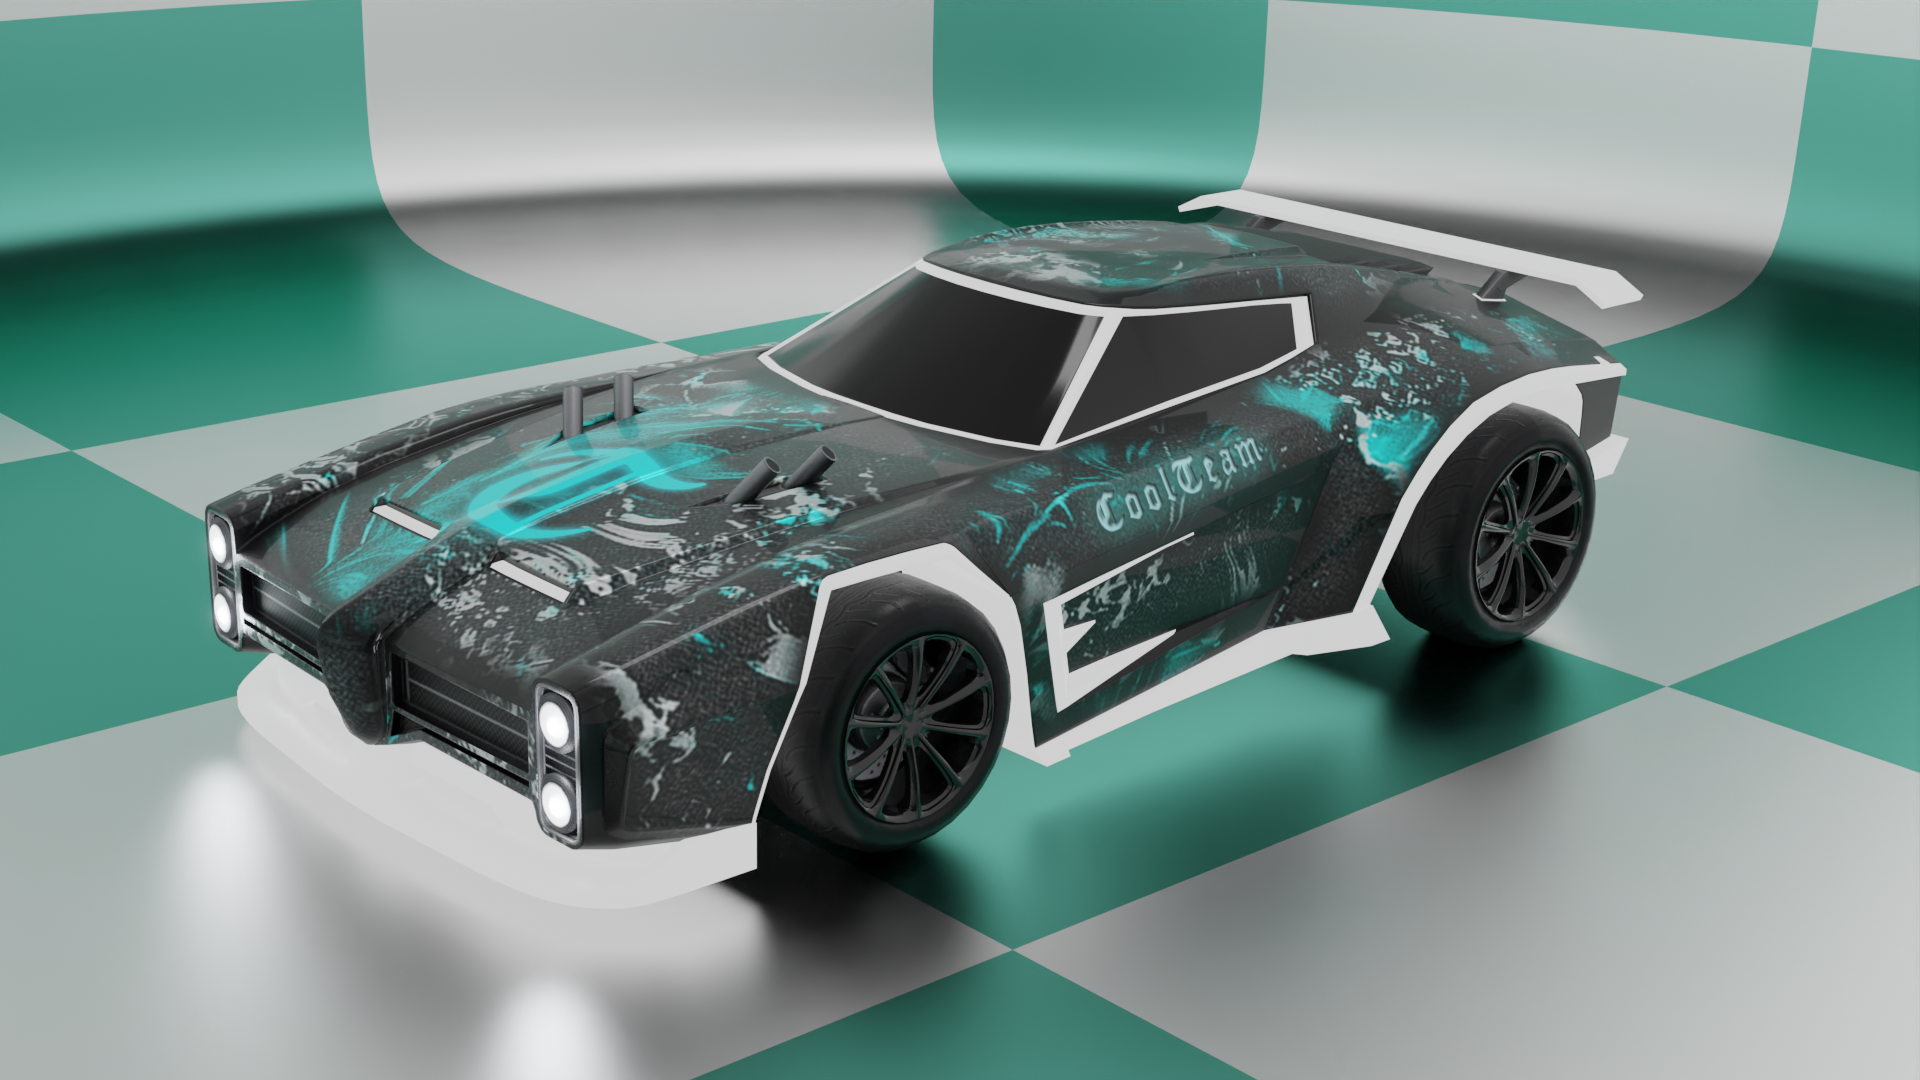 CoolTeam Dominus Decal